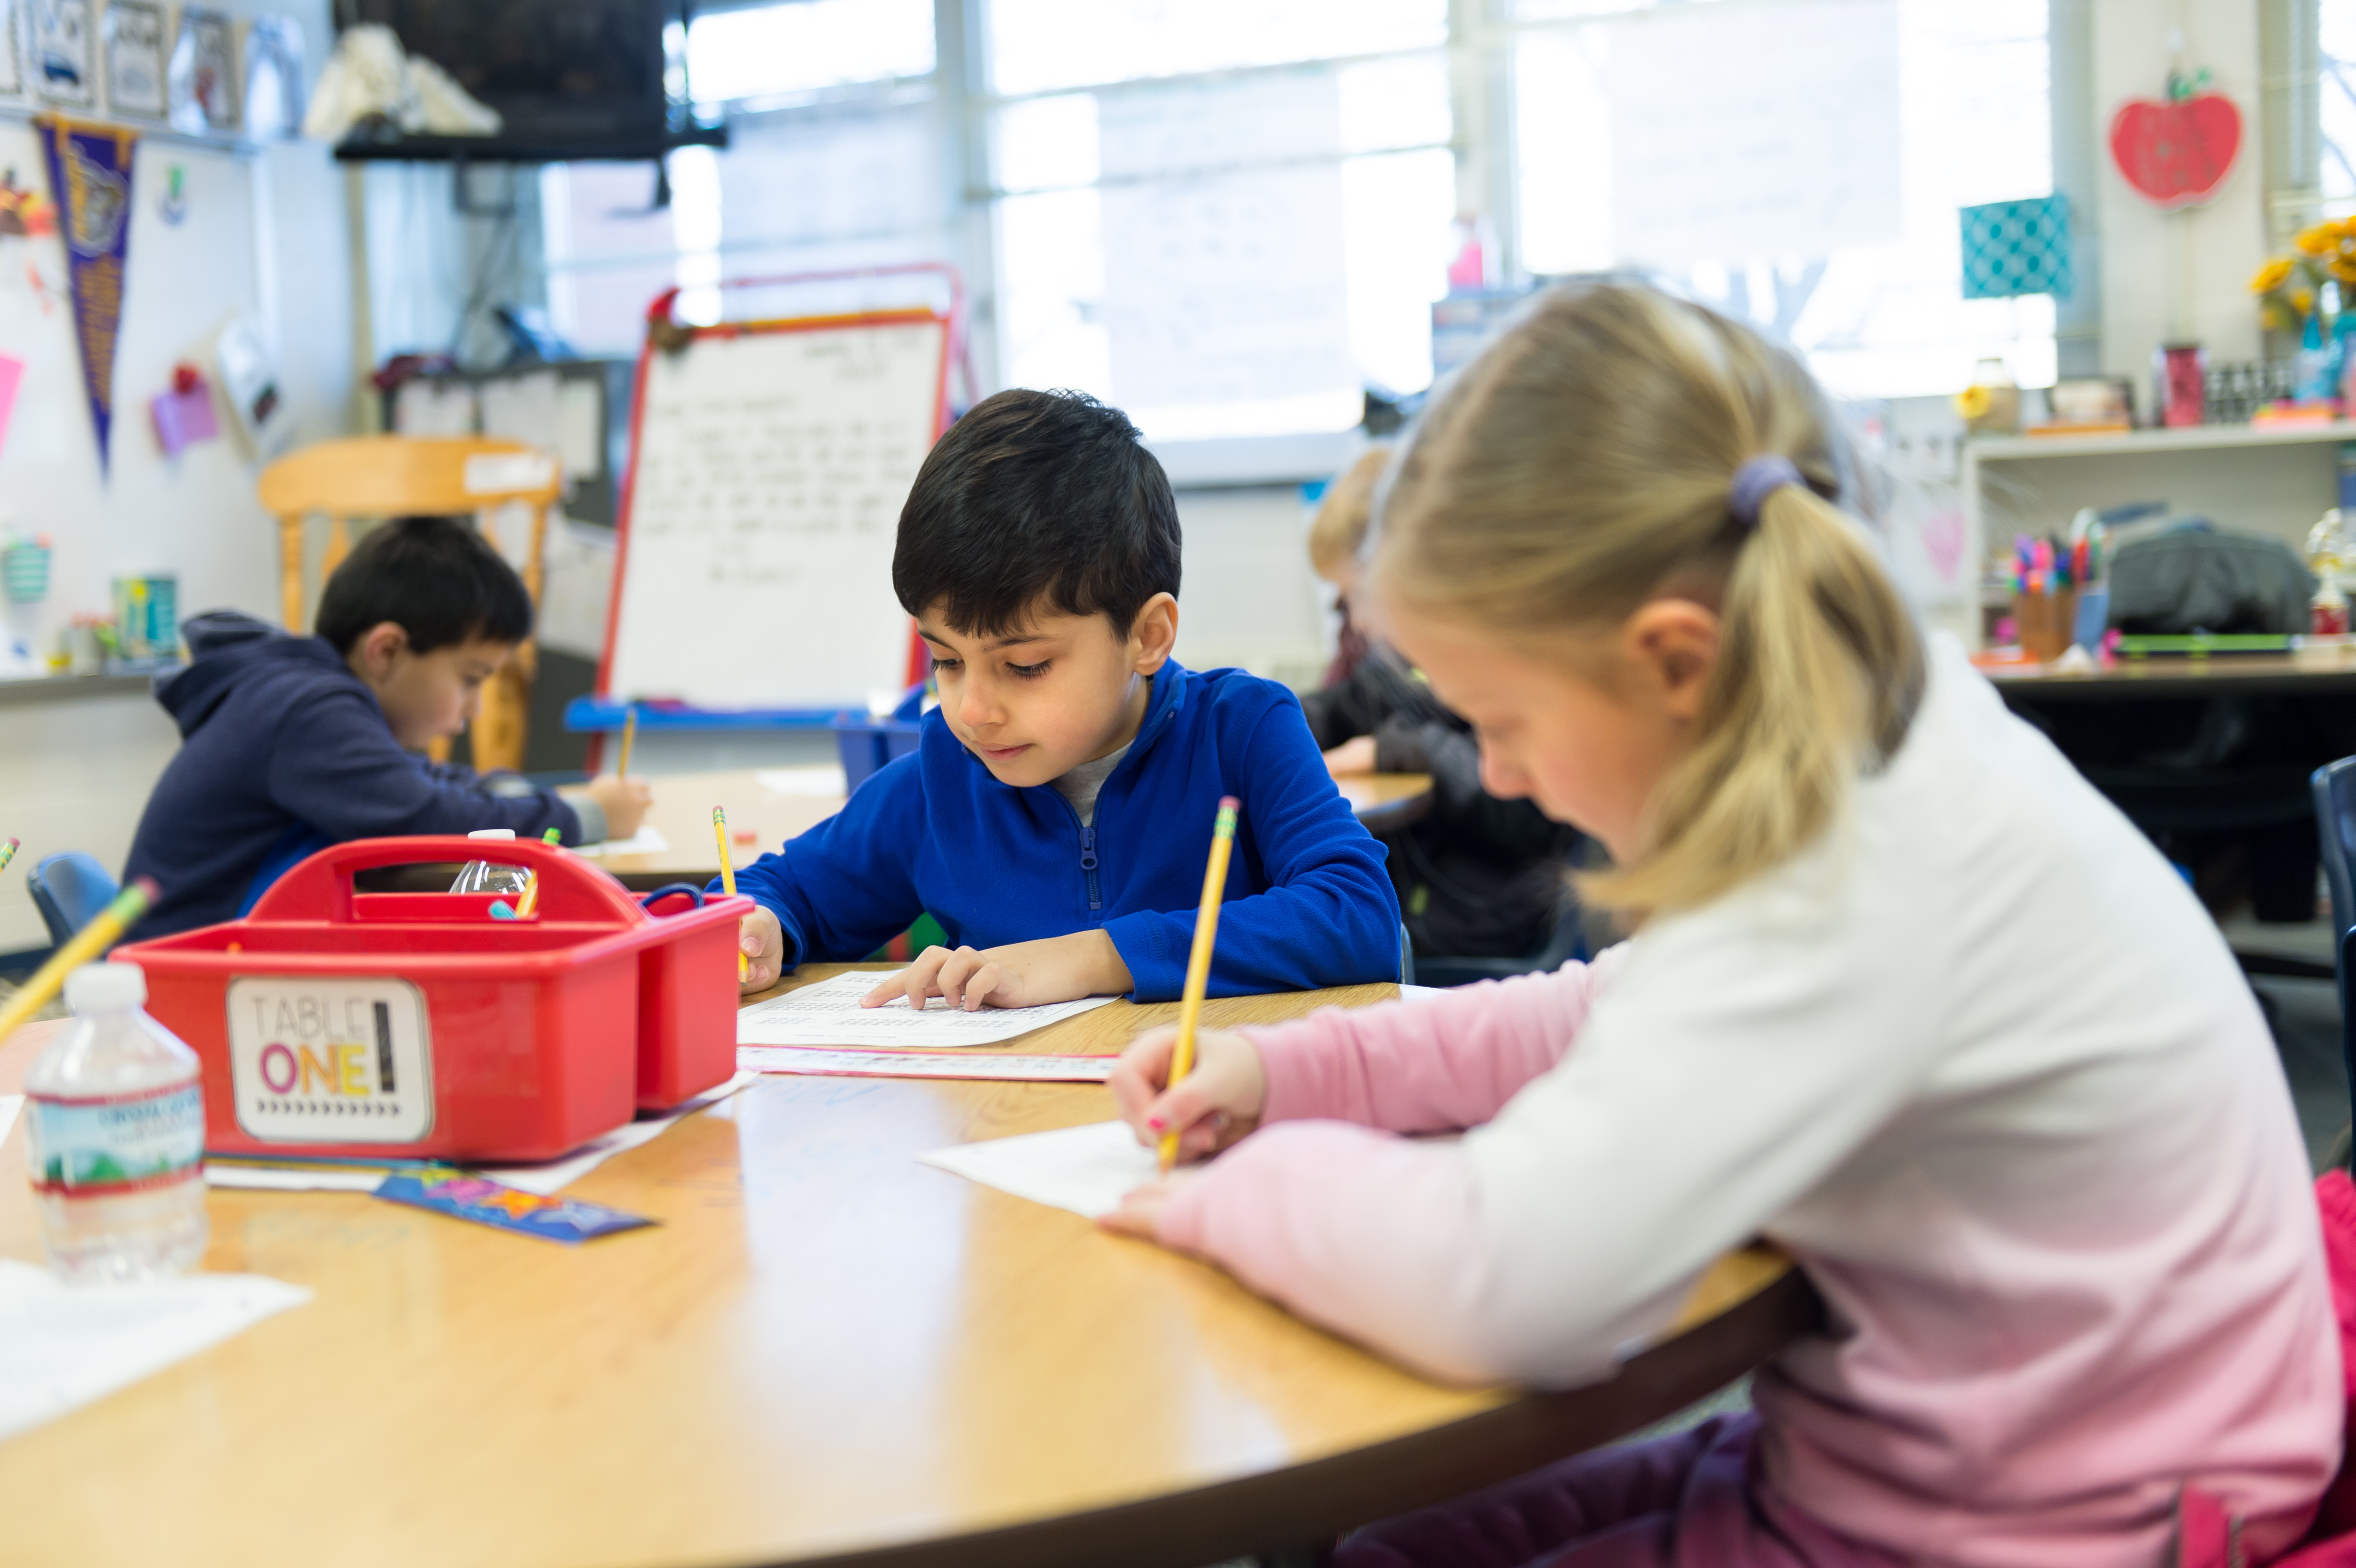 Students work together on an assignment in a classroom at Fairview Elementary.